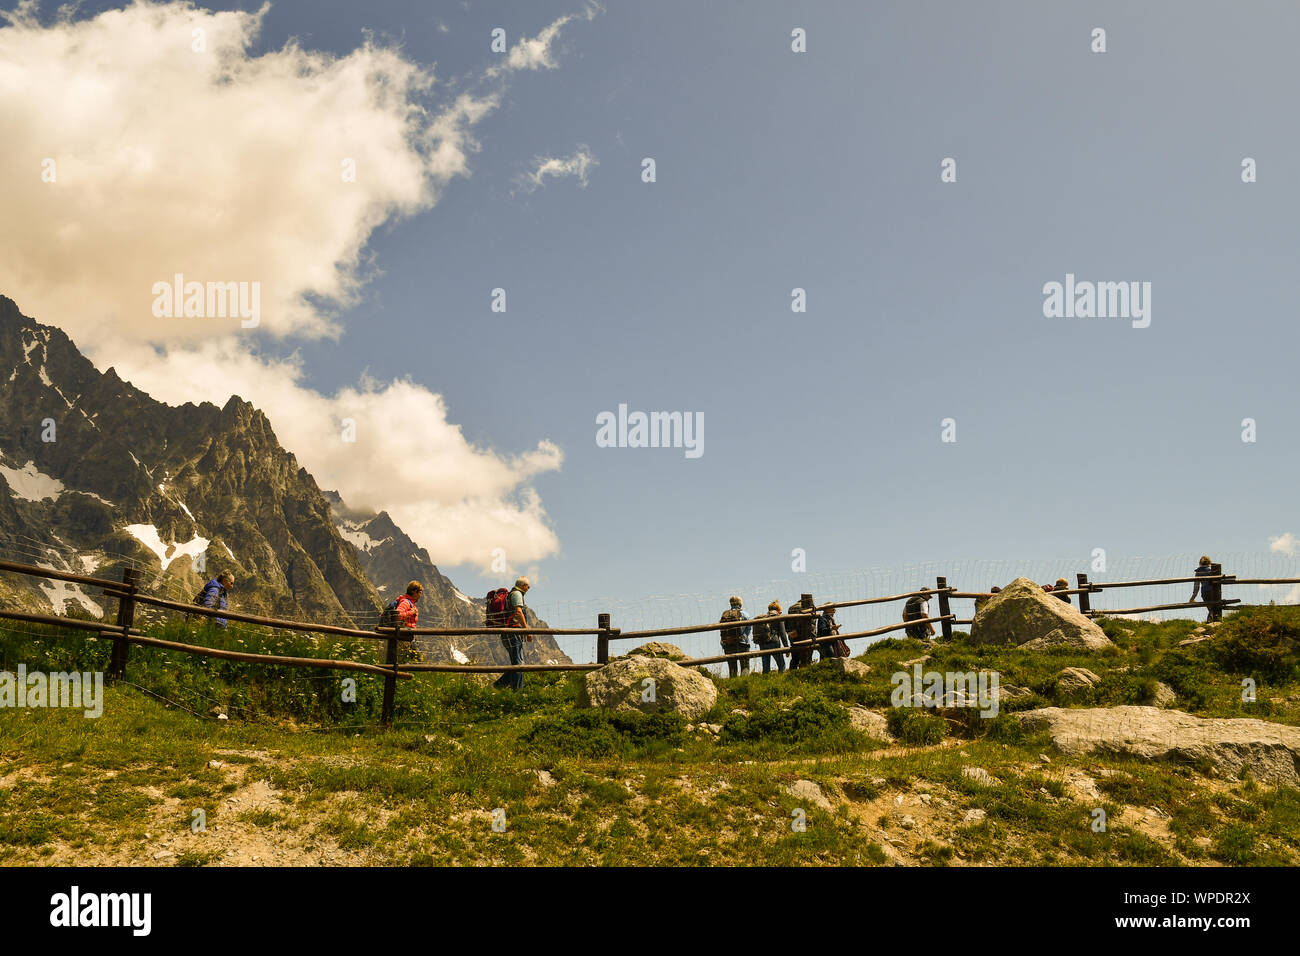 A group of aged hikers in the Alpine Botanical Garden Saussurea of the Skyway Monte Bianco in summer, Courmayeur, Aosta Valley, Alps, Italy Stock Photo